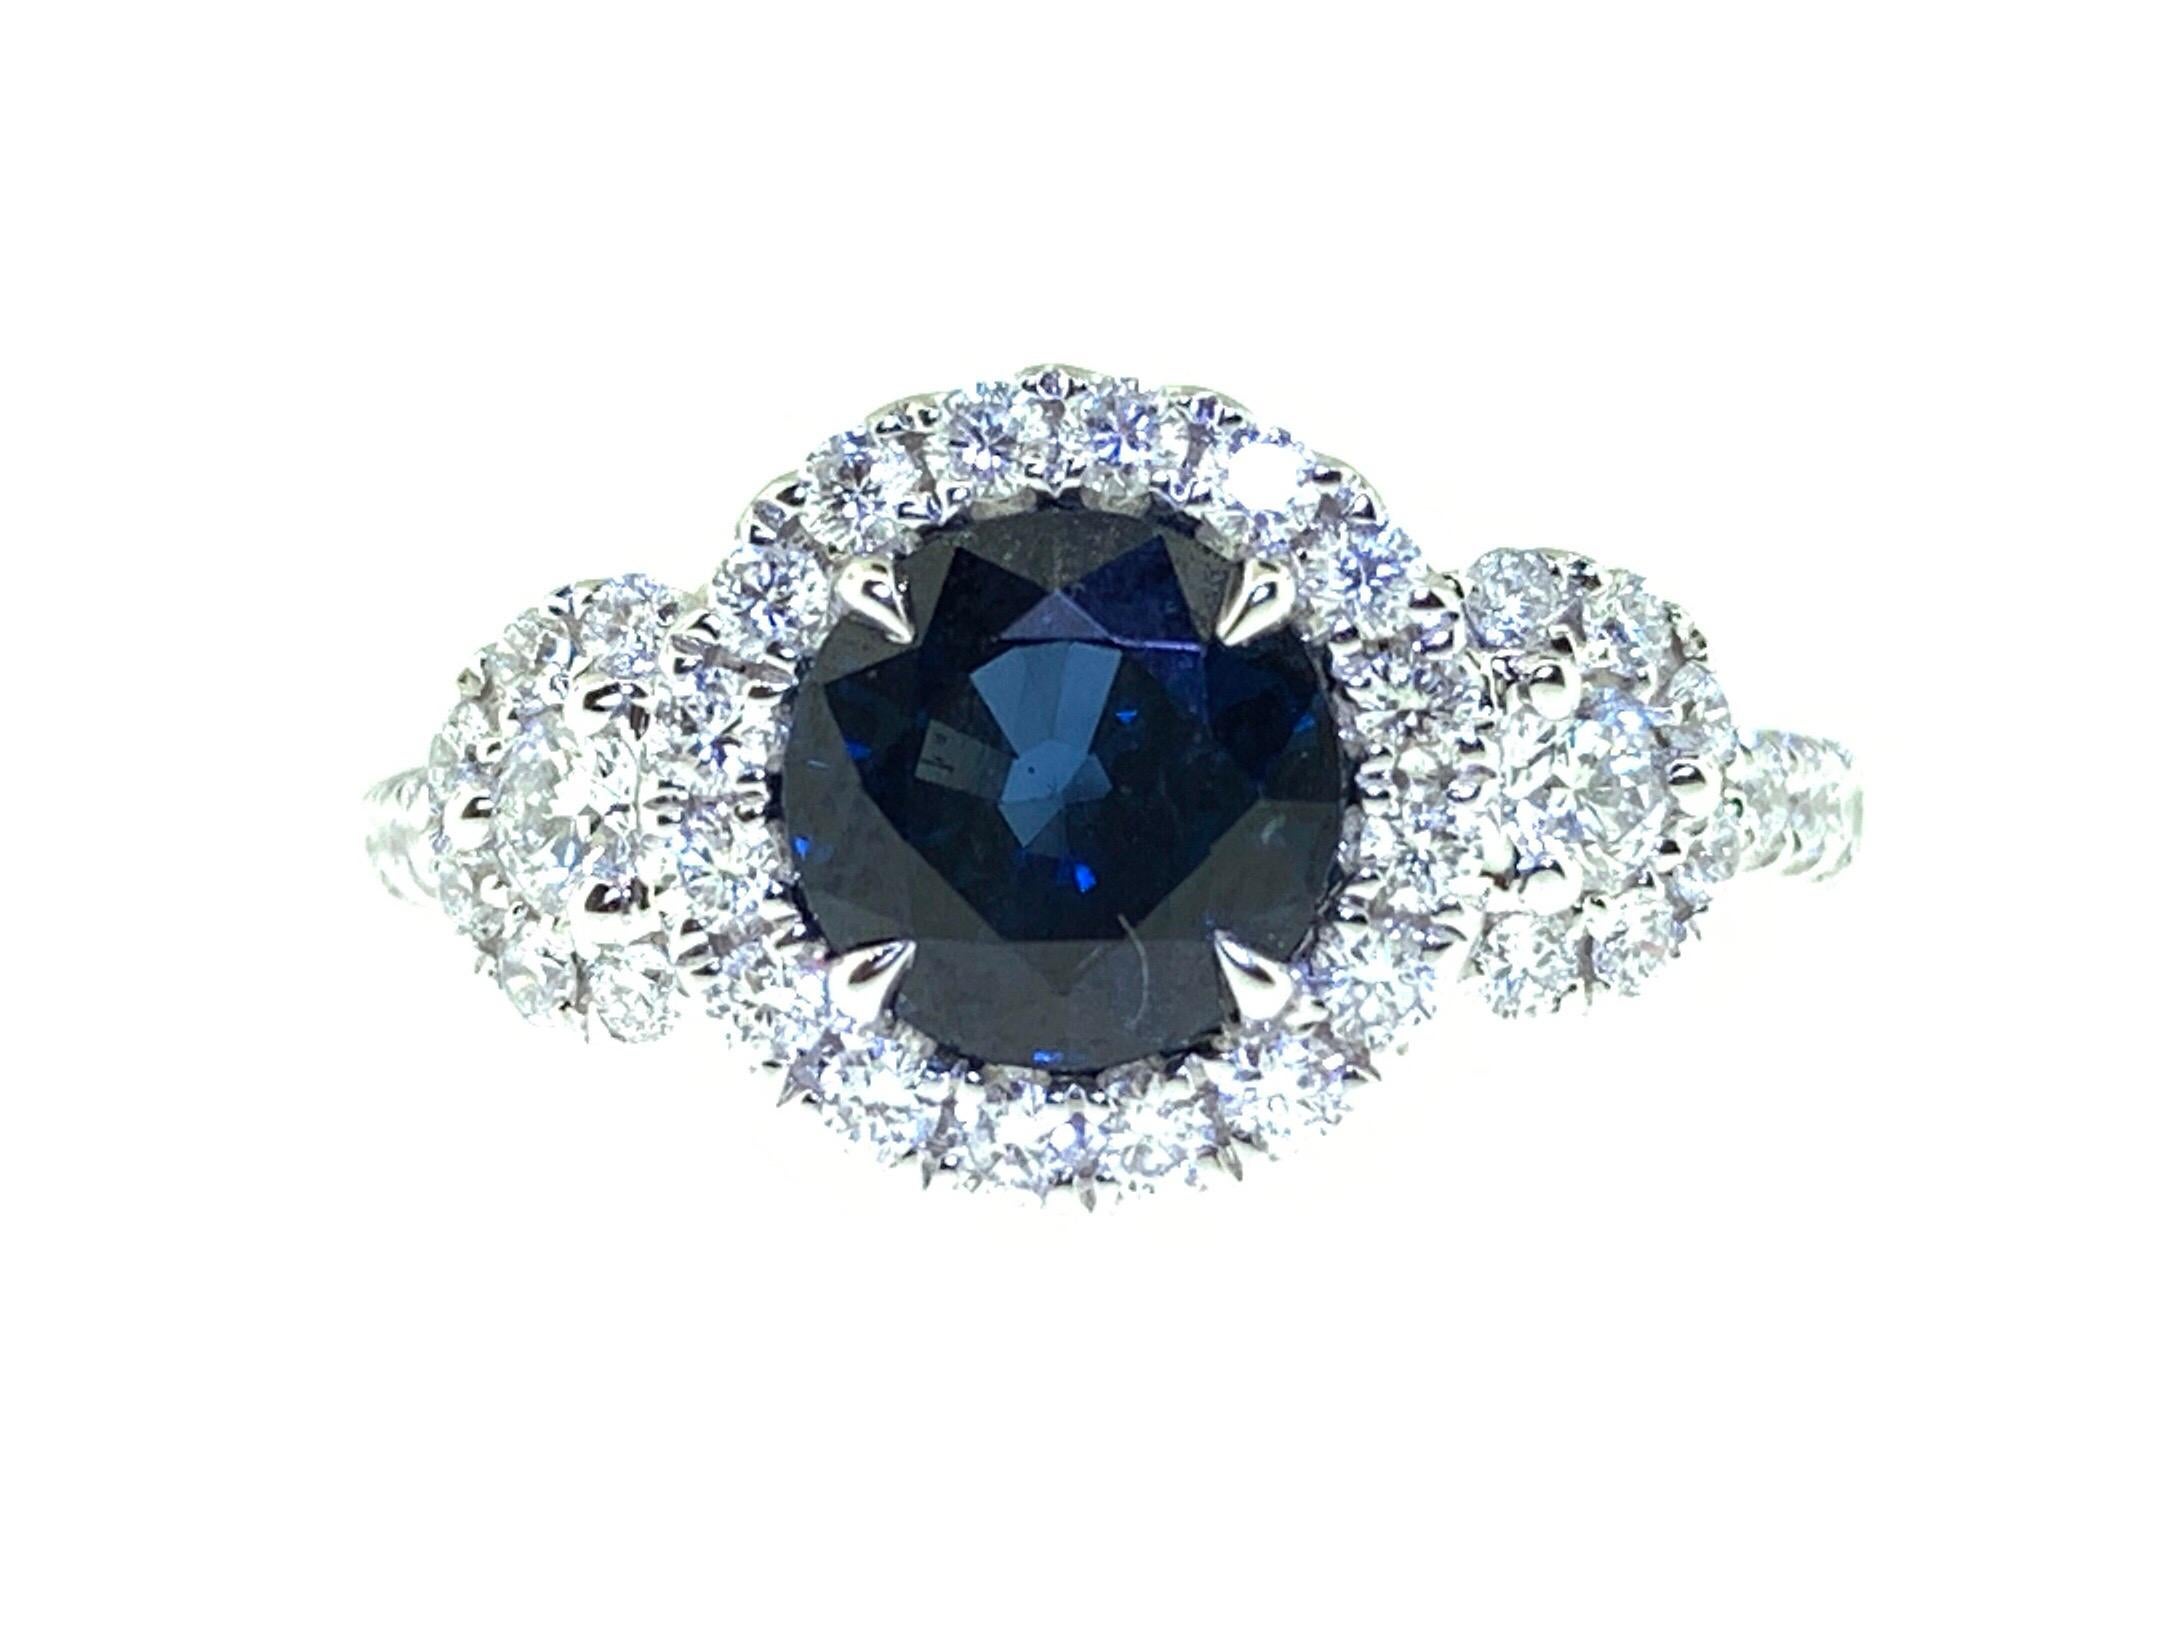 This stunning ring showcases a beautiful 1.65 carat blue round sapphire with a diamond halo set in 18 karat white gold flanked by two pave diamond circles. Total diamond weight = 0.65 carats of diamonds. Ring size is 6 1/2.
